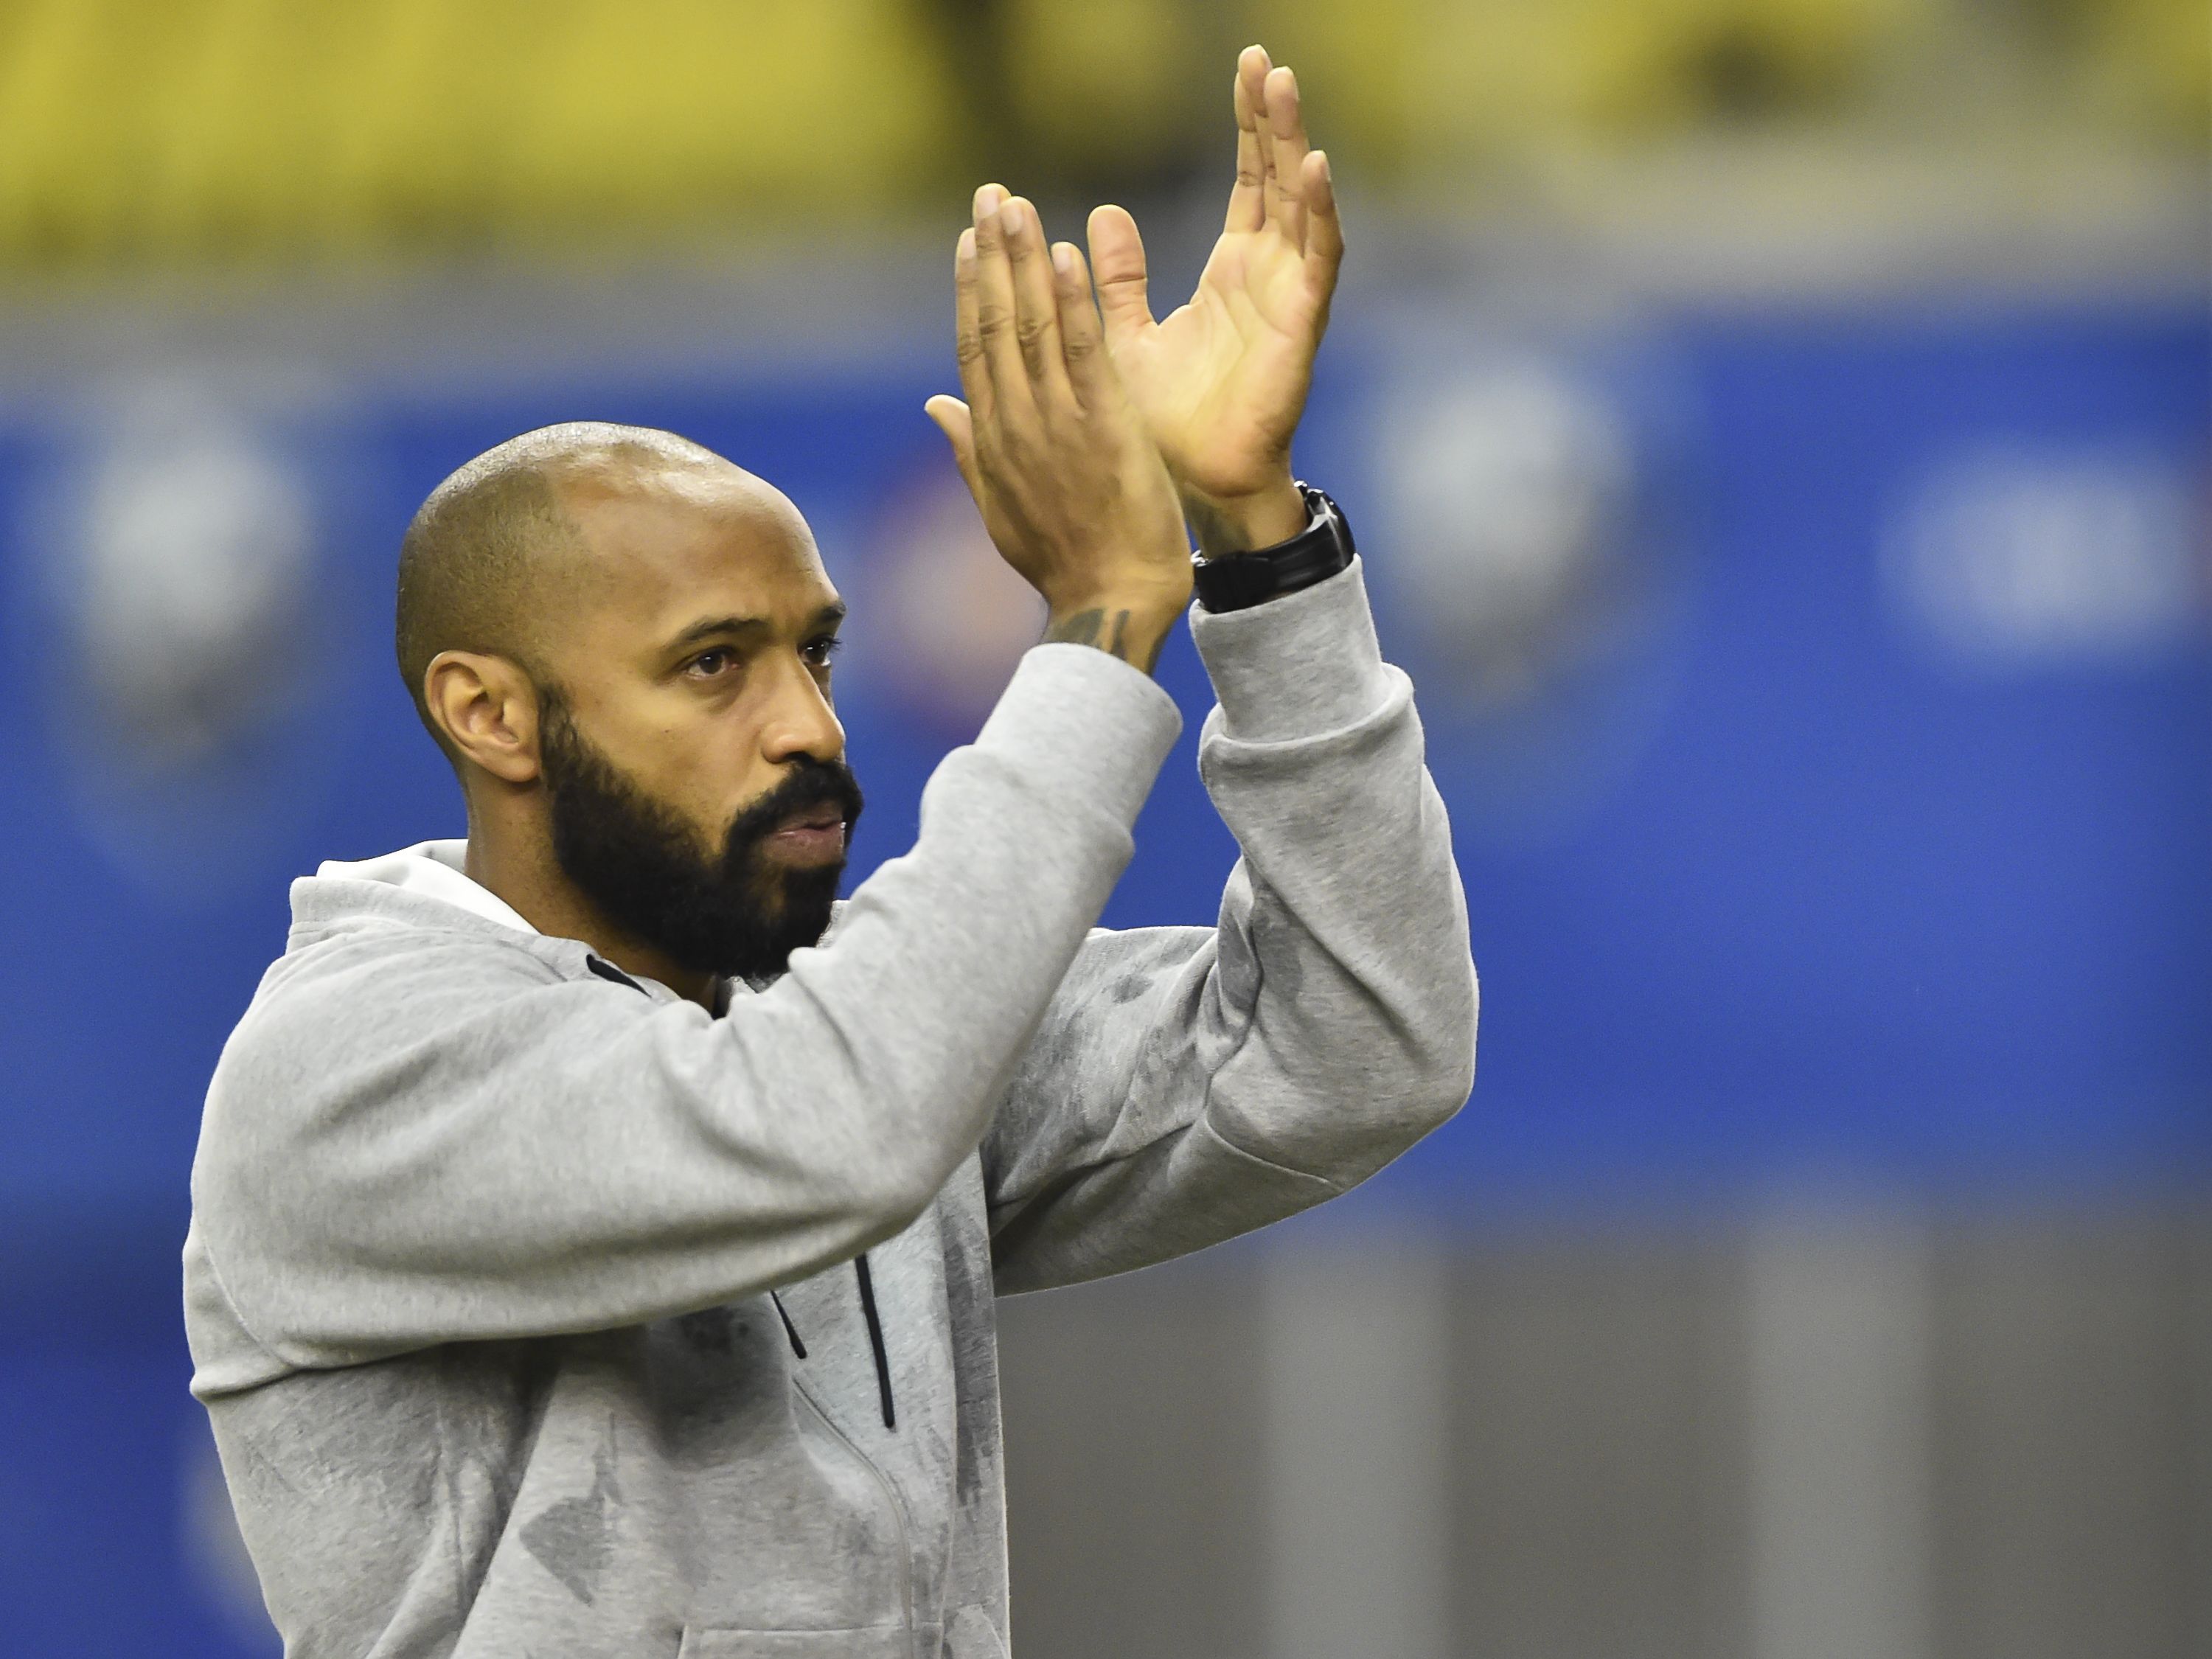 Thierry Henry says he'd have no problem with gay teammates - Once